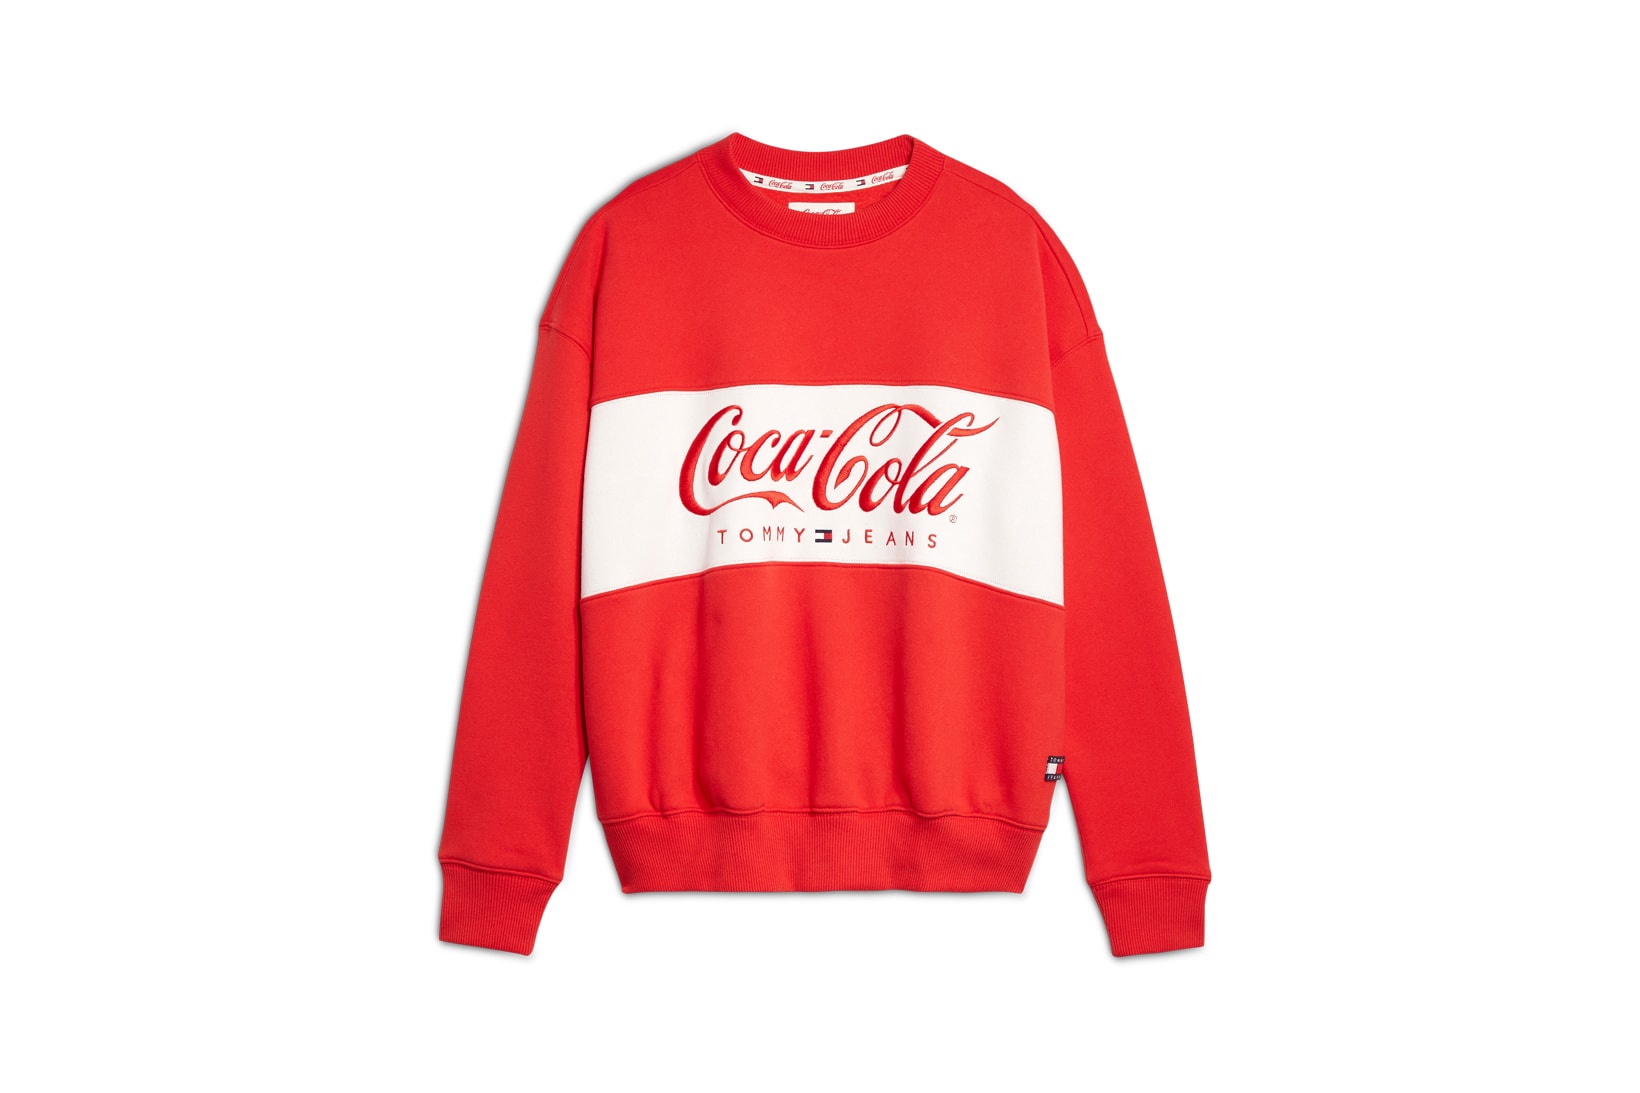 Coca-Cola x Tommy Jeans Capsule Collection Crew Sweater Red